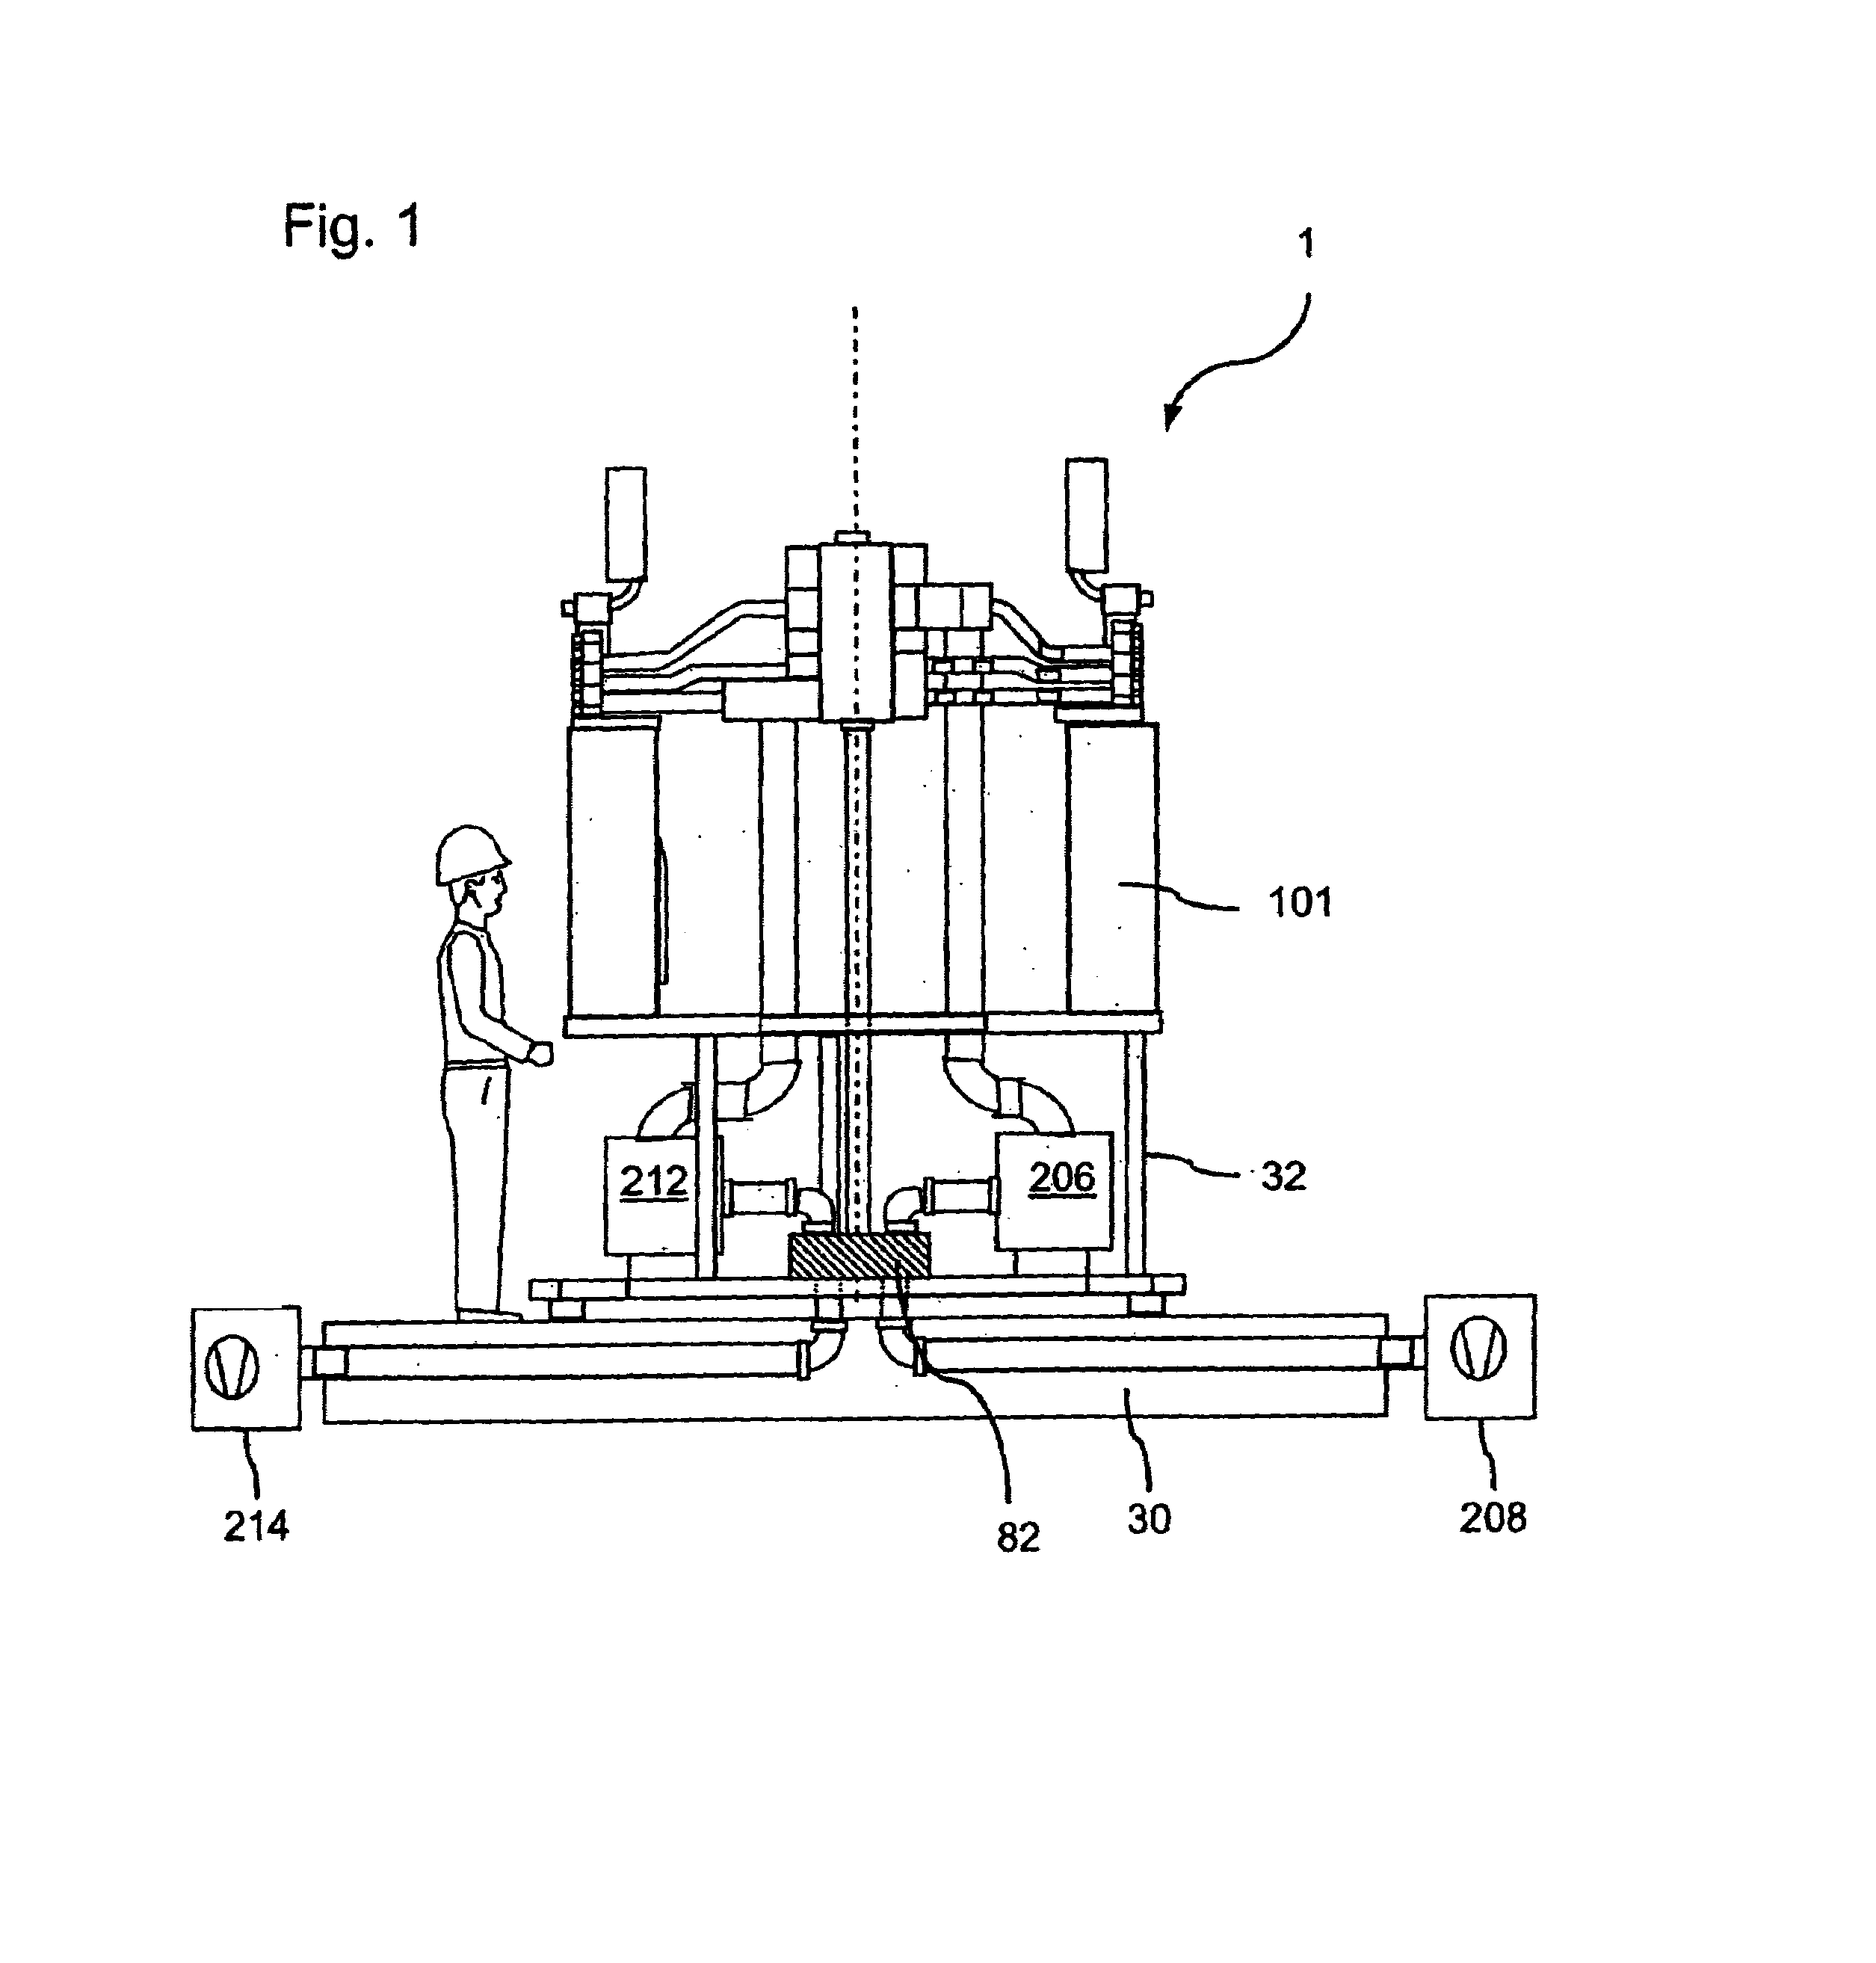 Apparatus for treating workpieces